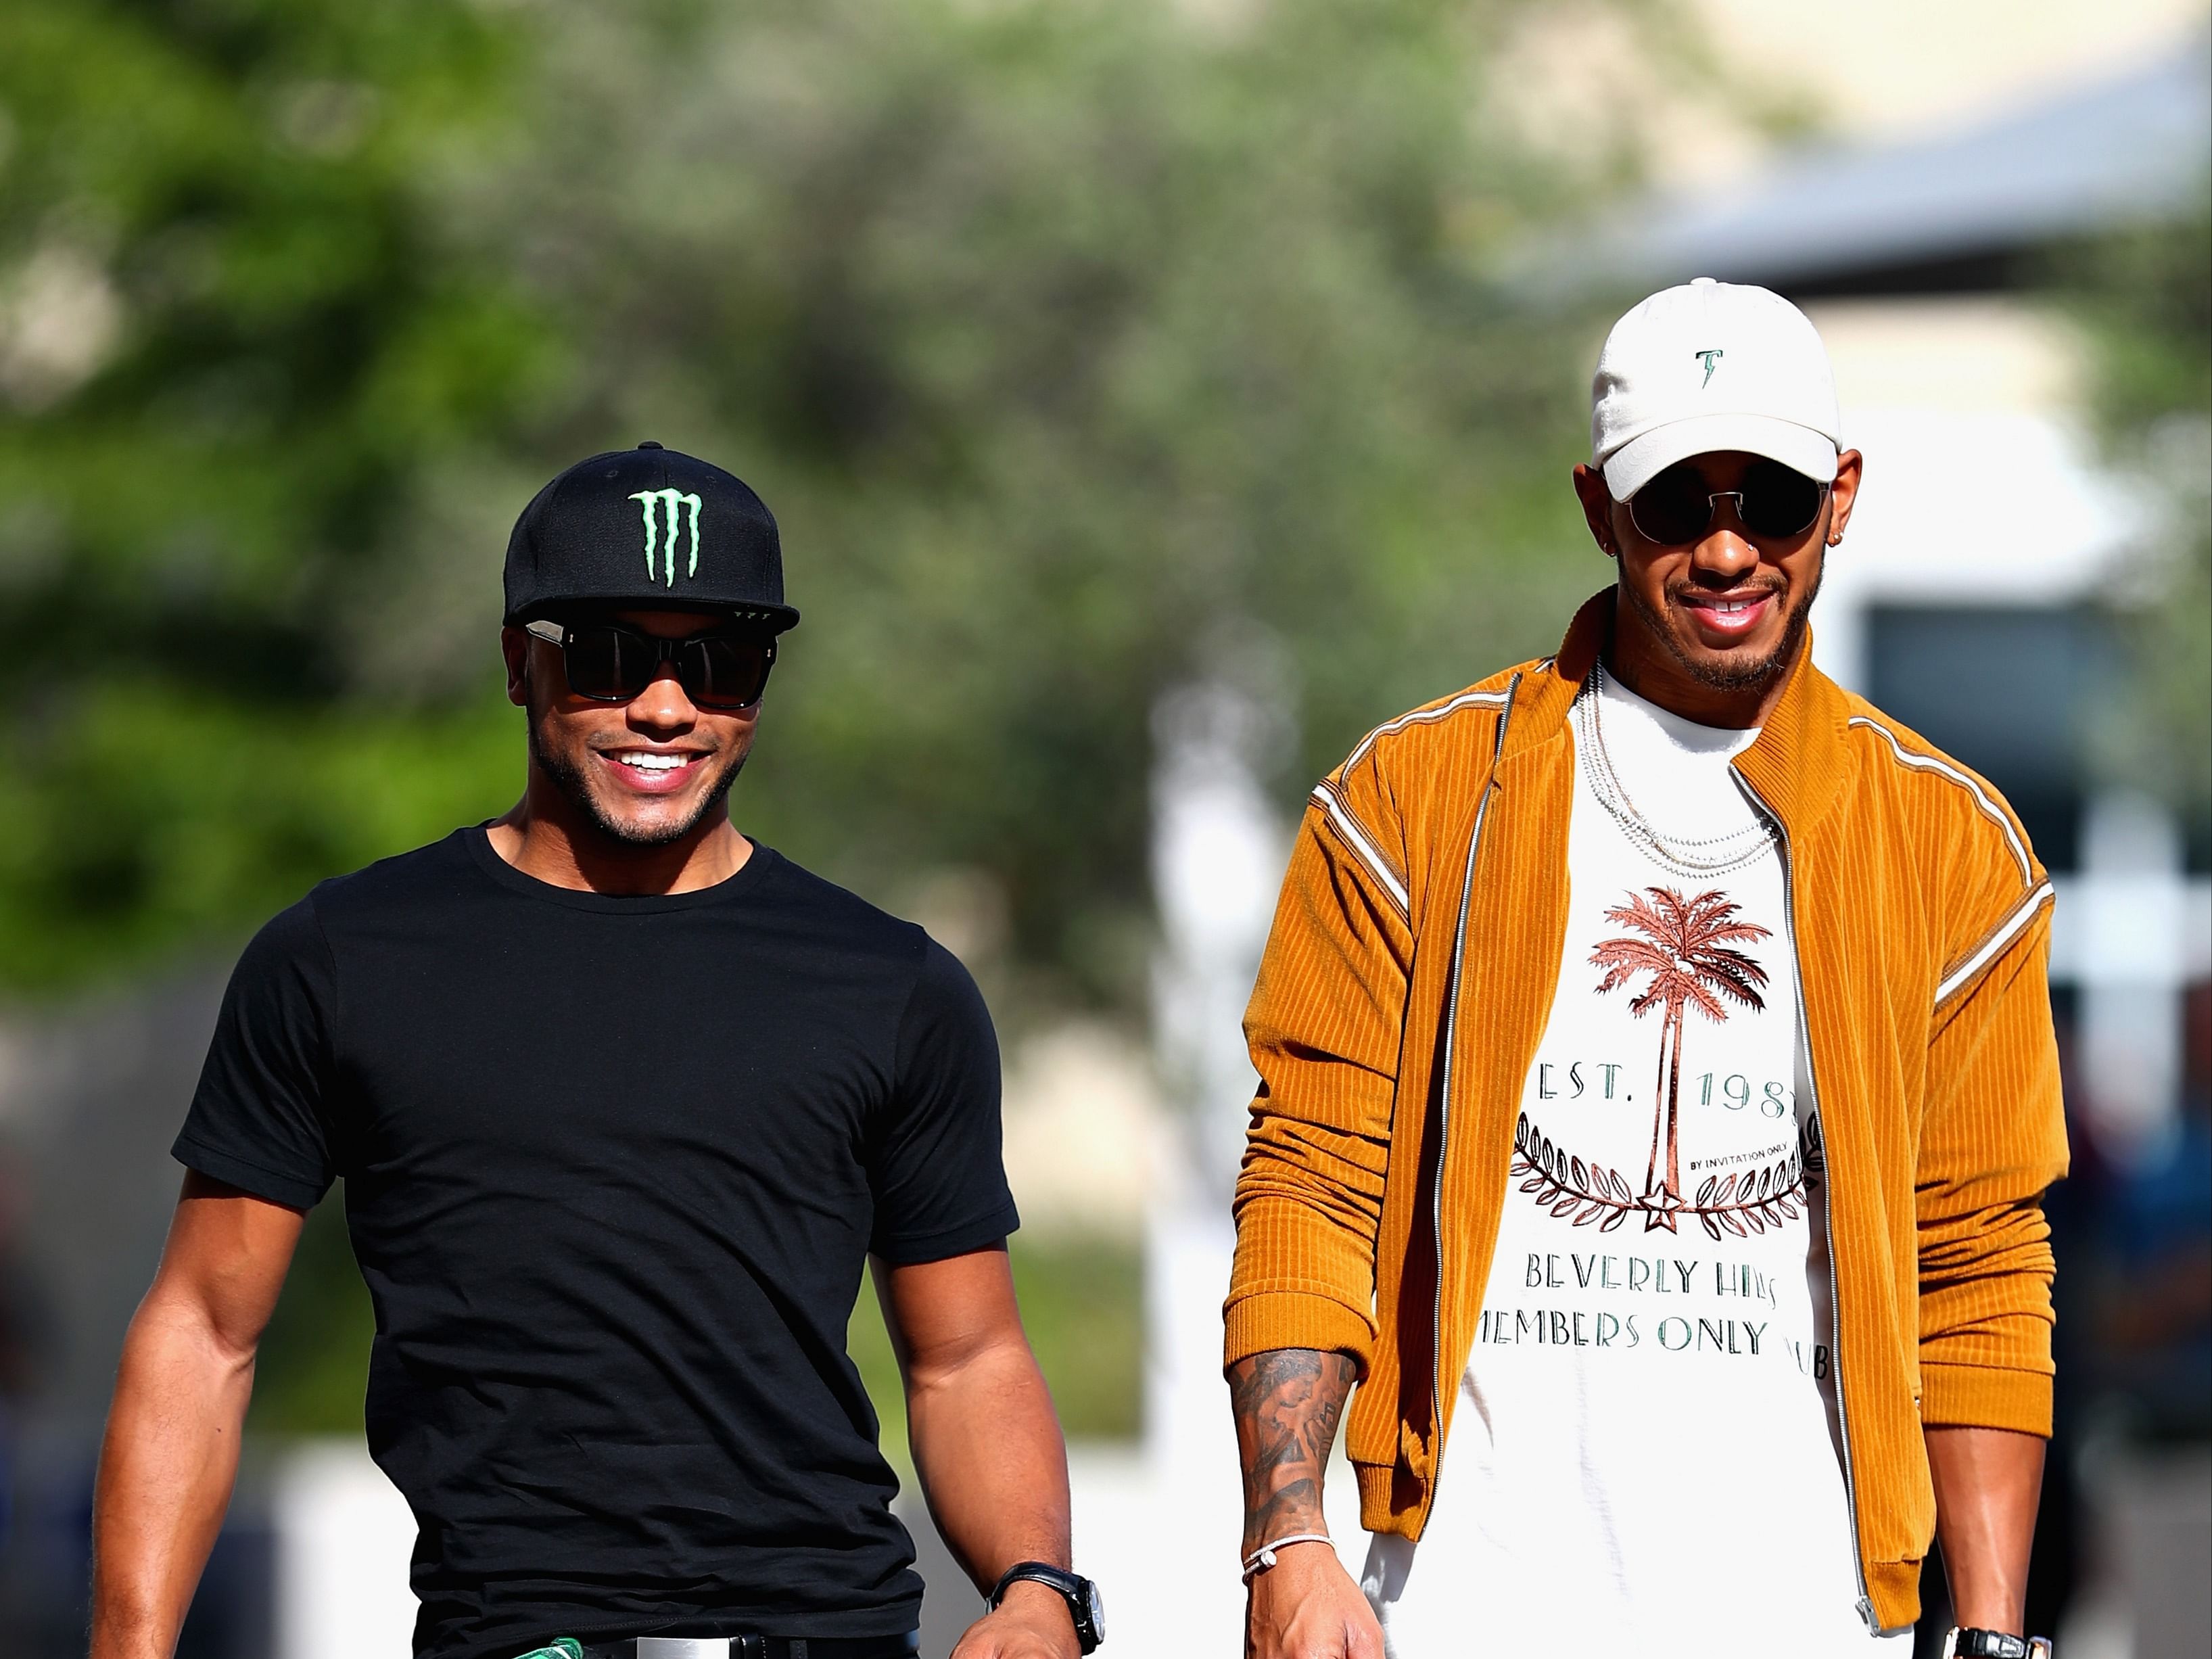 Lewis Hamilton walks in the paddock with his brother Nicholas Hamilton during previews ahead of the 2017 F1 United States Grand Prix. (Photo by Clive Rose/Getty Images)